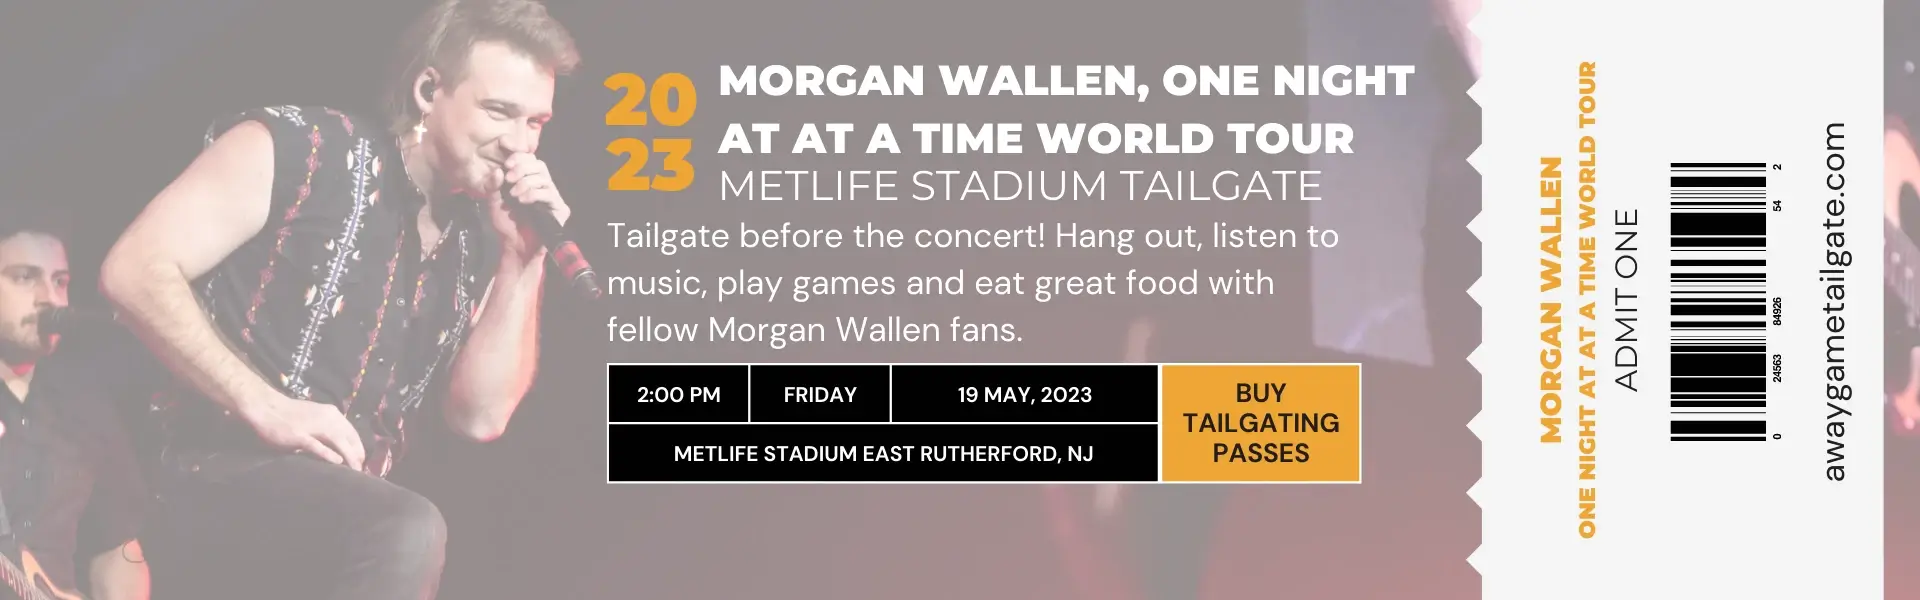 Morgan Wallen, One Night At At A Time World Tour MetLife Stadium Tailgate